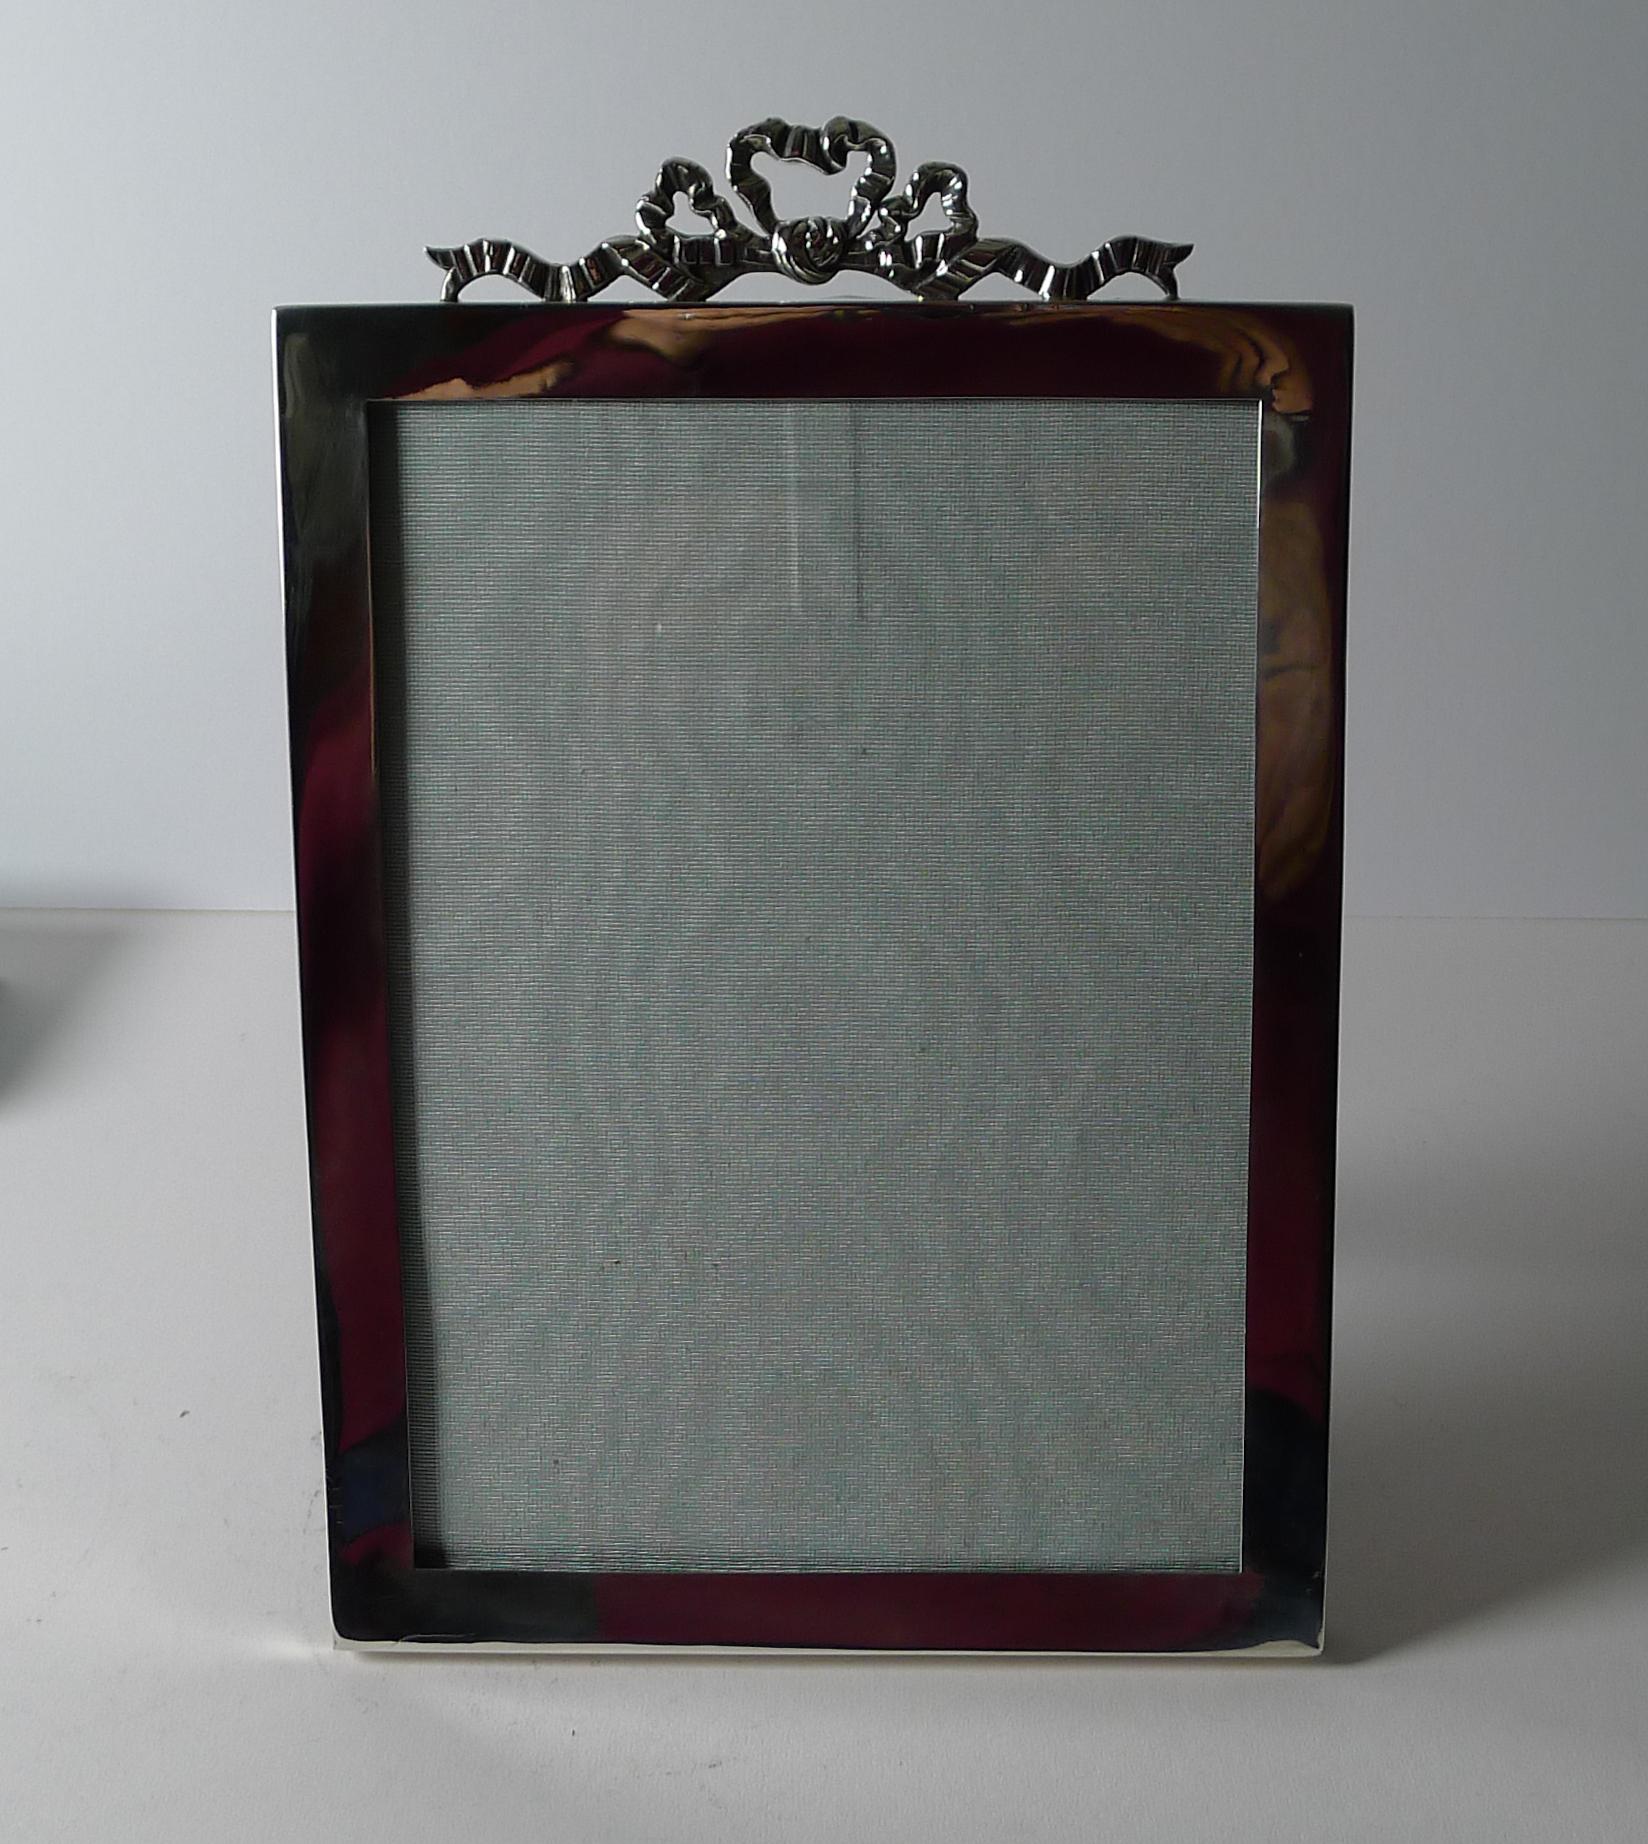 A stunning English Edwardian frame made from solid / sterling silver fully hallmarked for London 1906.  The makers mark is also present for F W Hentsch.

The frame is topped with a stunning Ribbon and Bow mount and the backing is made from solid